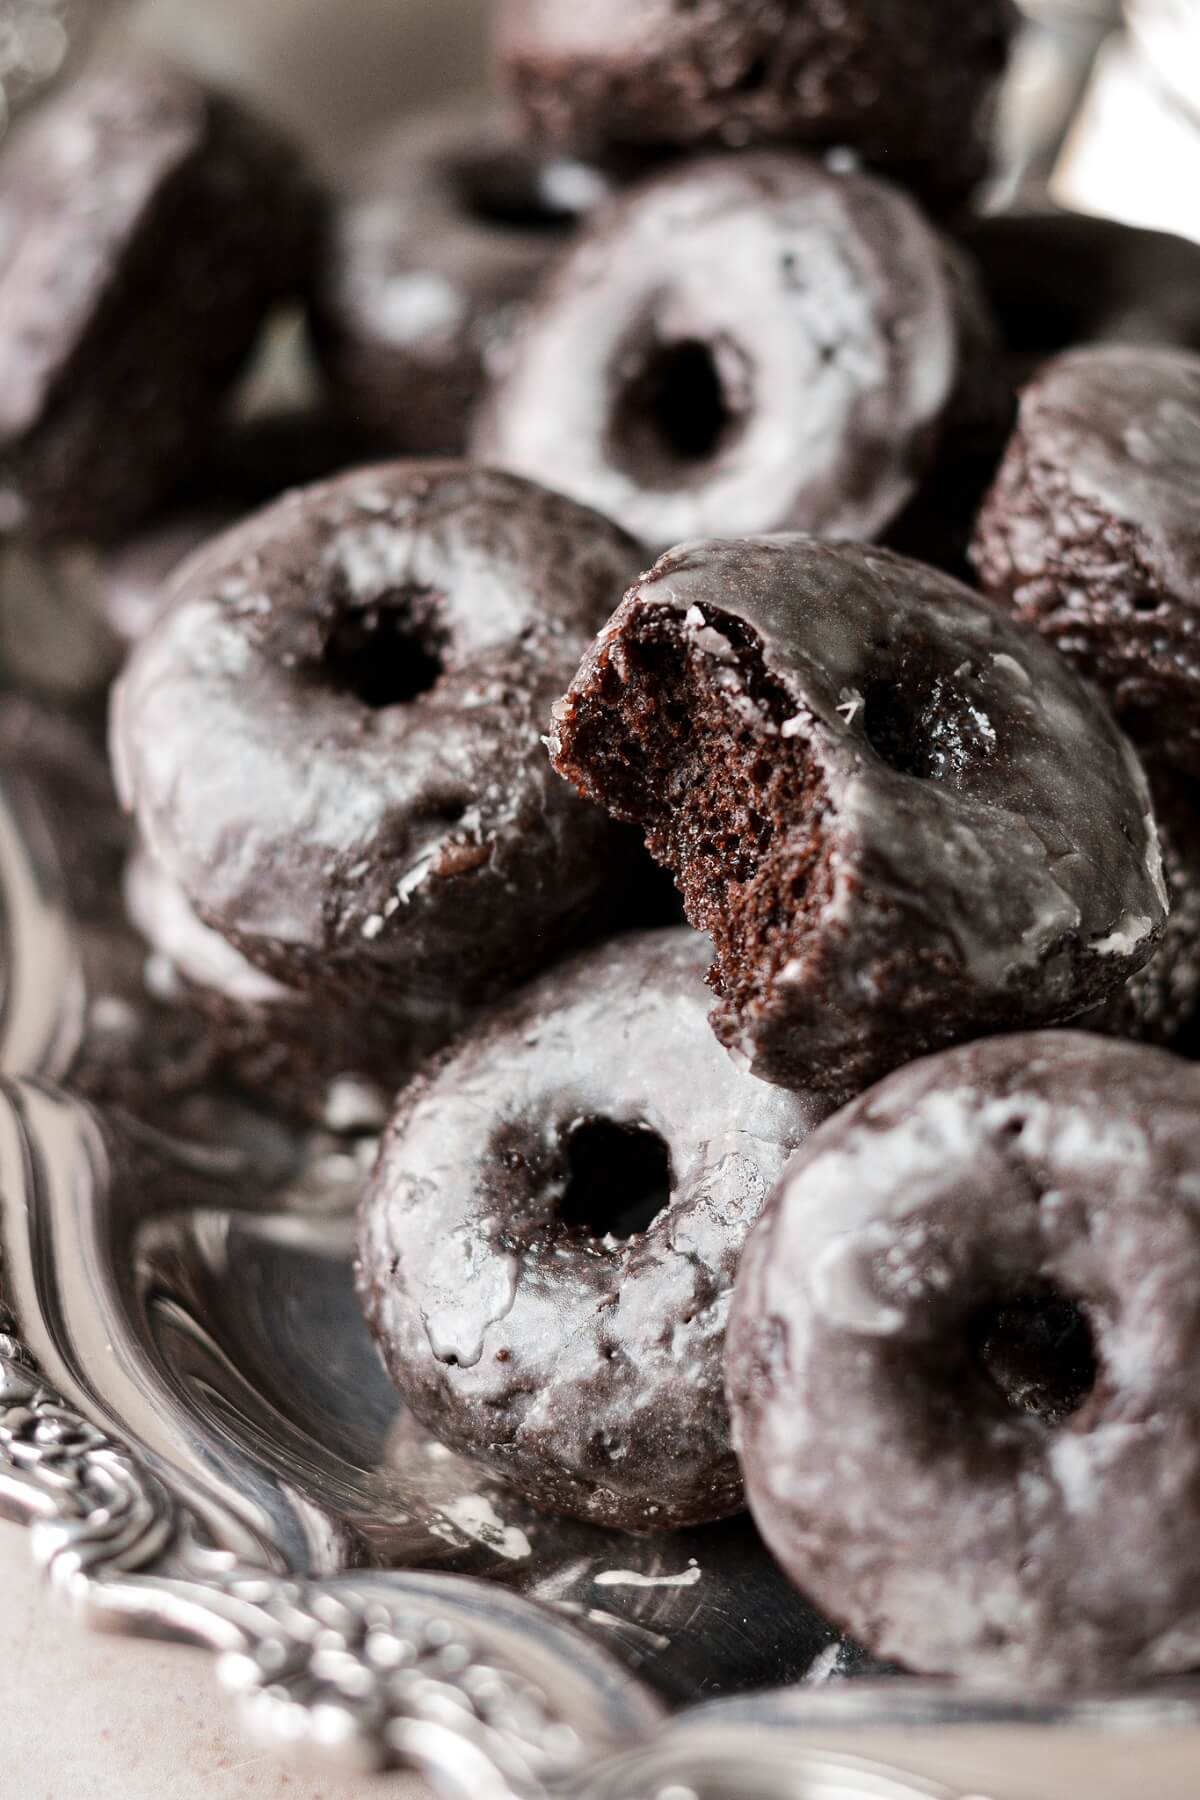 Mini baked chocolate cake doughnuts, one with a bite taken.